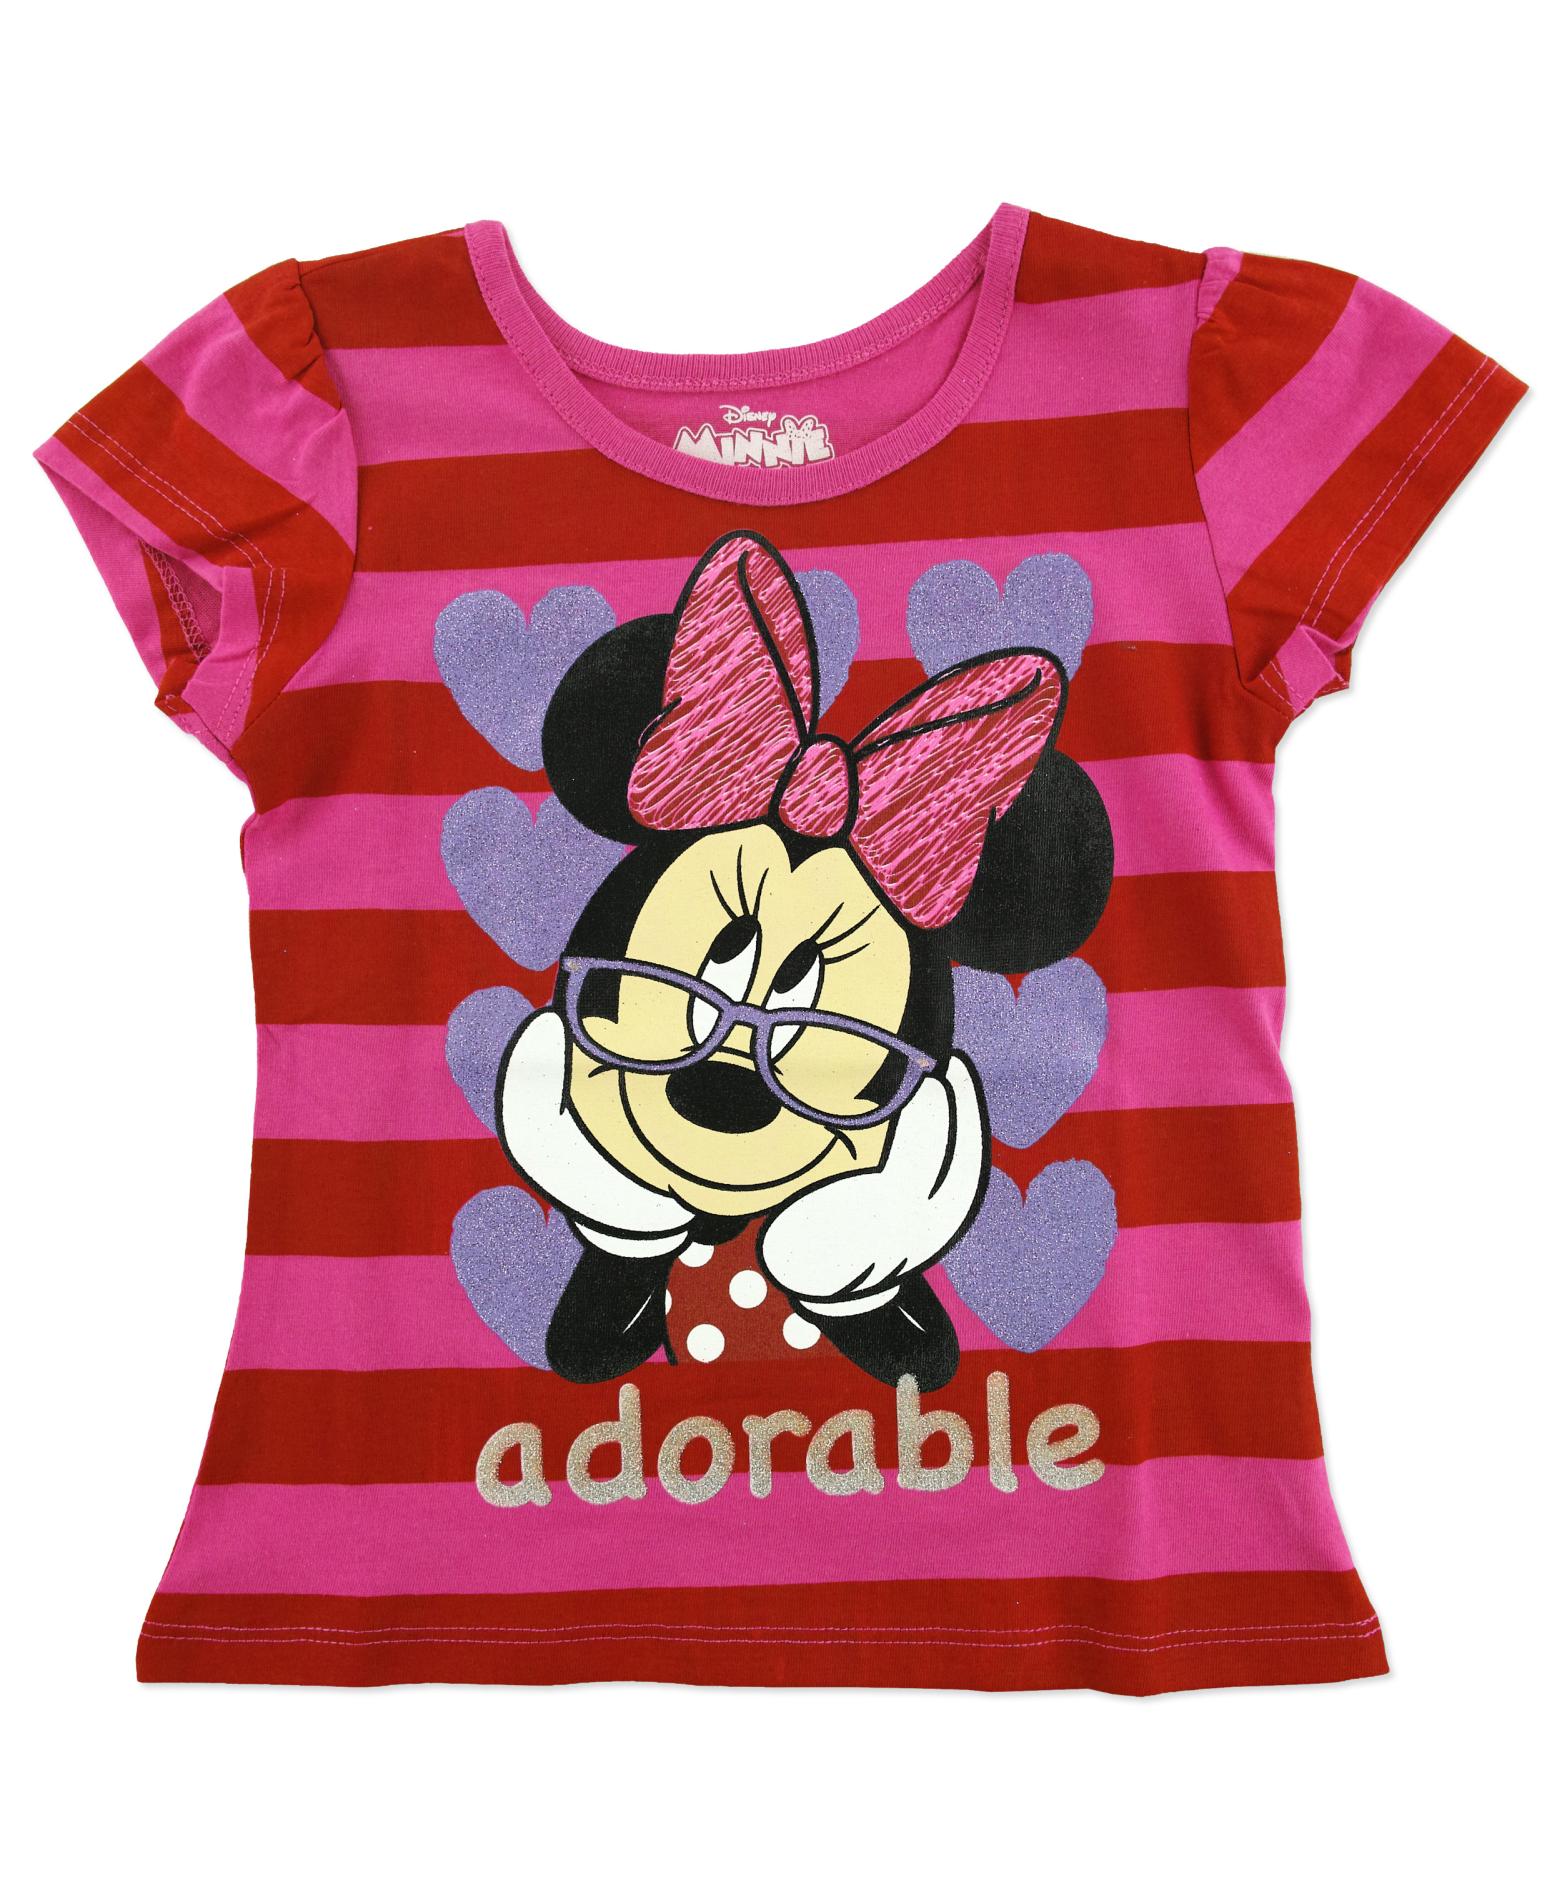 Disney Minnie Mouse Toddler Girl's Graphic T-Shirt - Adorable